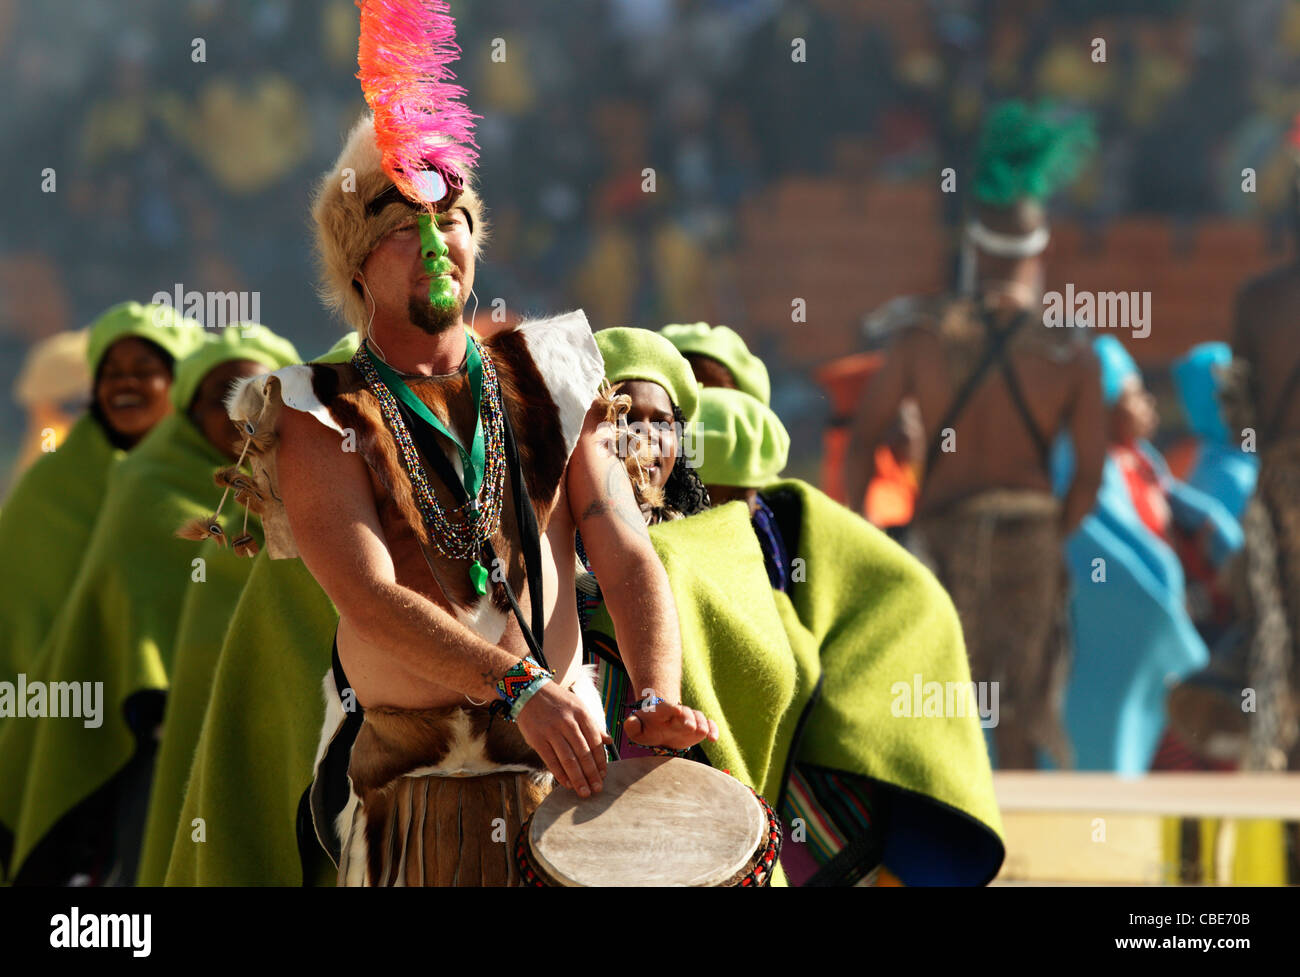 A drummer performs at the opening ceremony of the FIFA World Cup soccer tournament at Soccer City Stadium on June 11, 2010. Stock Photo